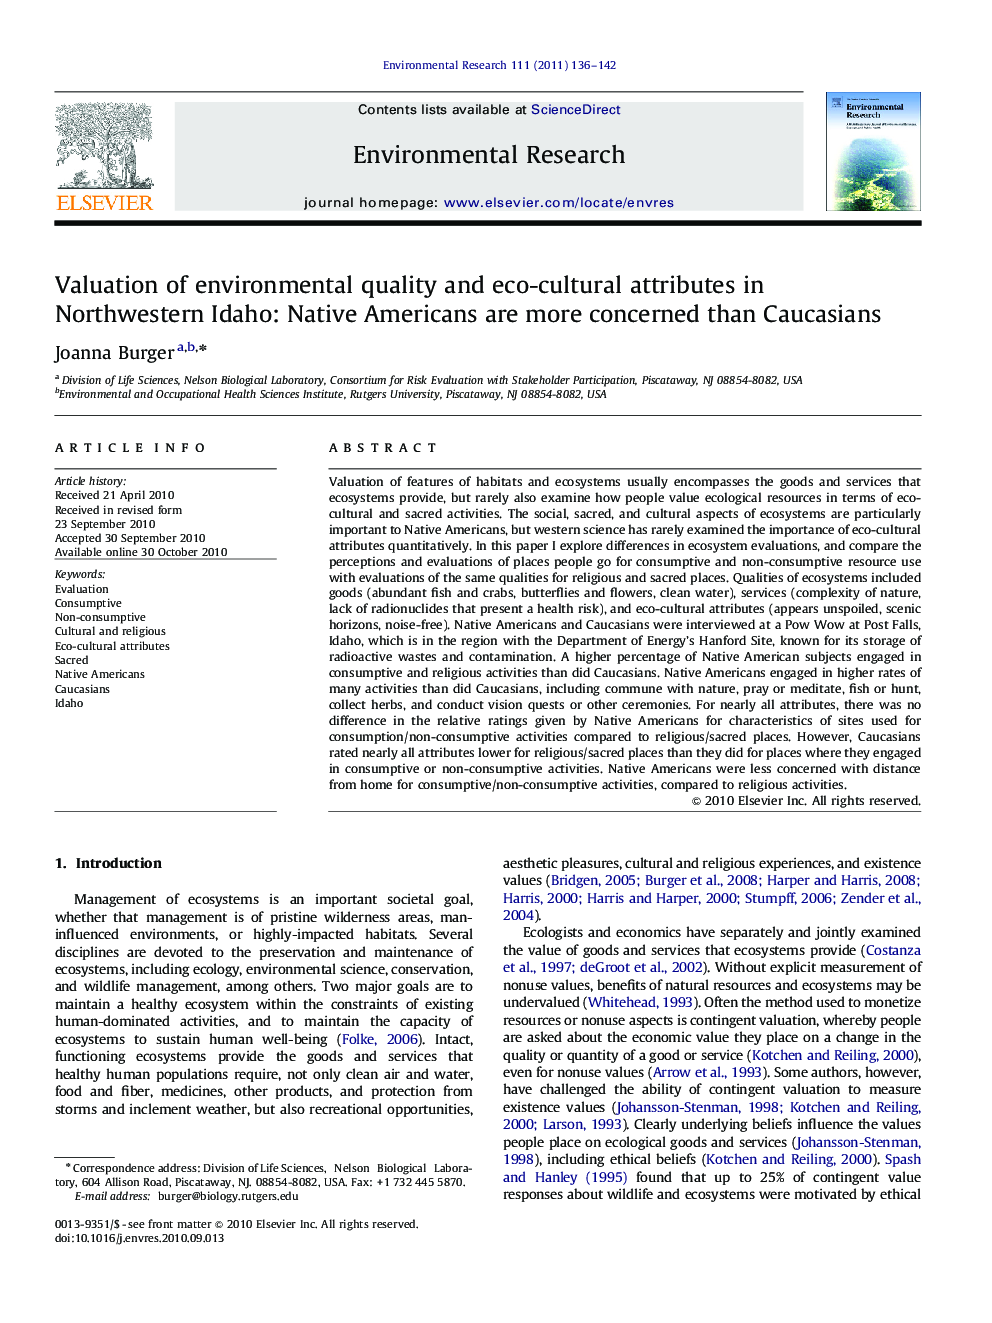 Valuation of environmental quality and eco-cultural attributes in Northwestern Idaho: Native Americans are more concerned than Caucasians